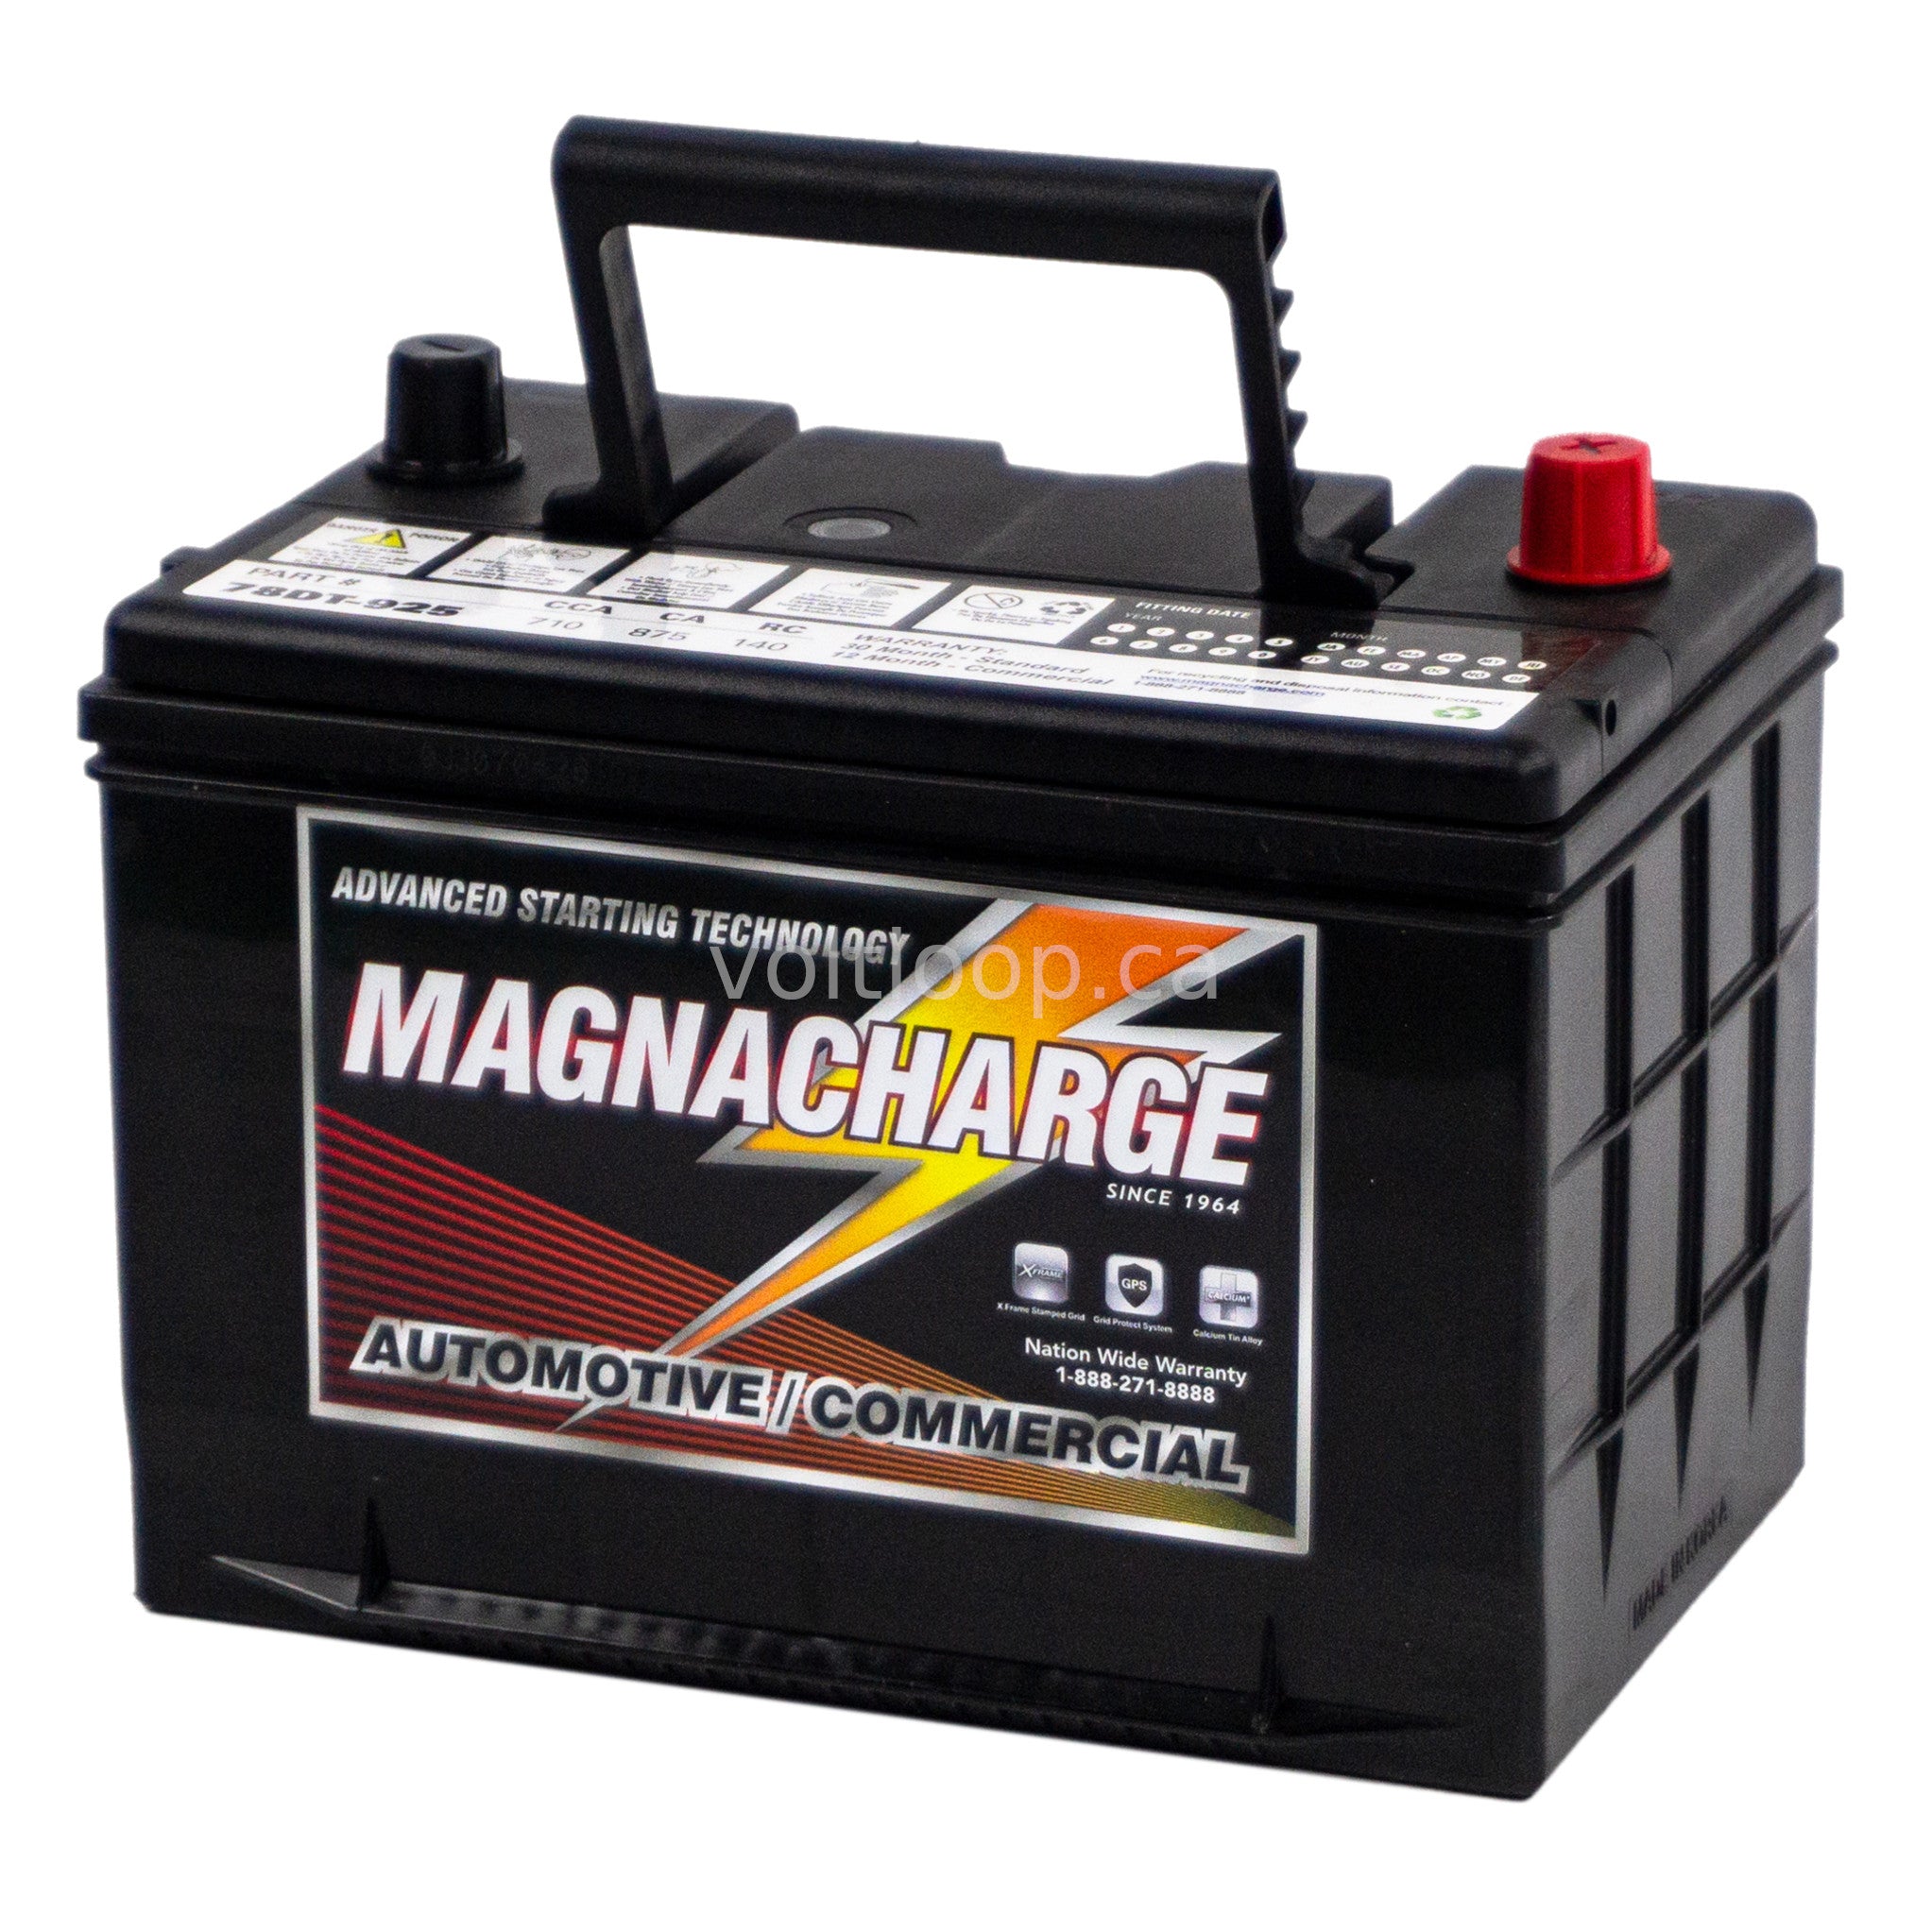 Magnacharge 78DT-925 Group 34/78 Car Battery